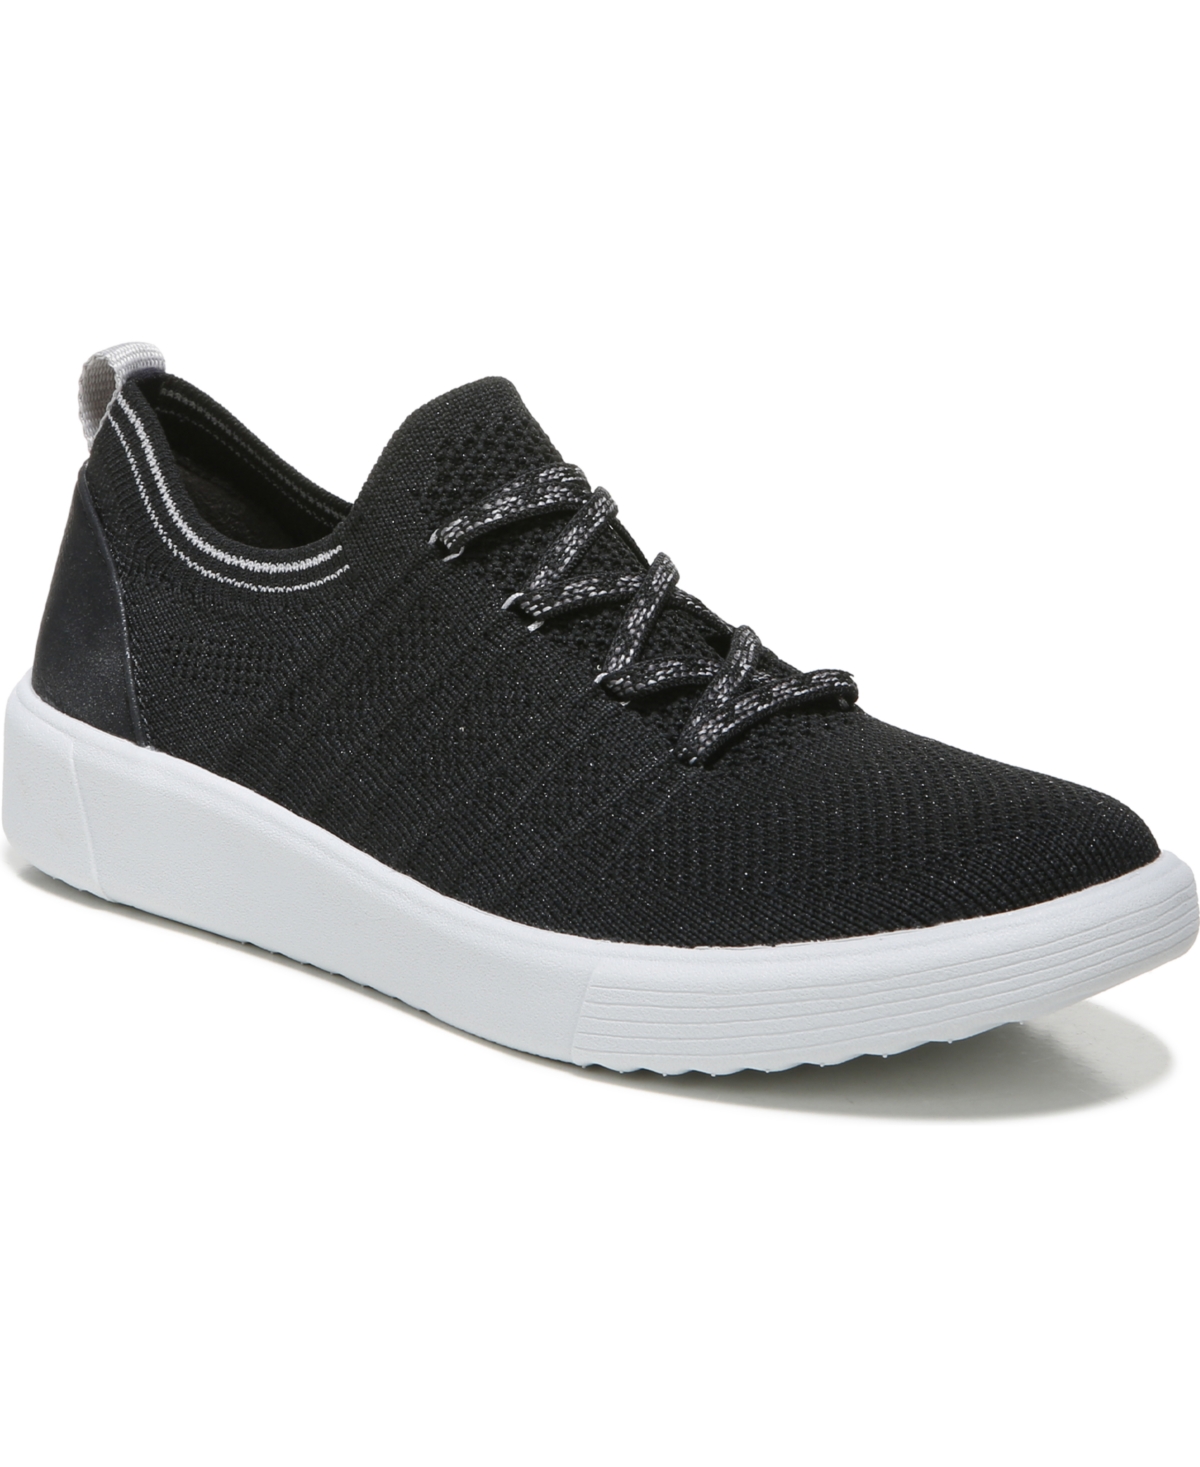 Bzees Premium March On Washable Slip-on Sneakers In Black Knit Fabric